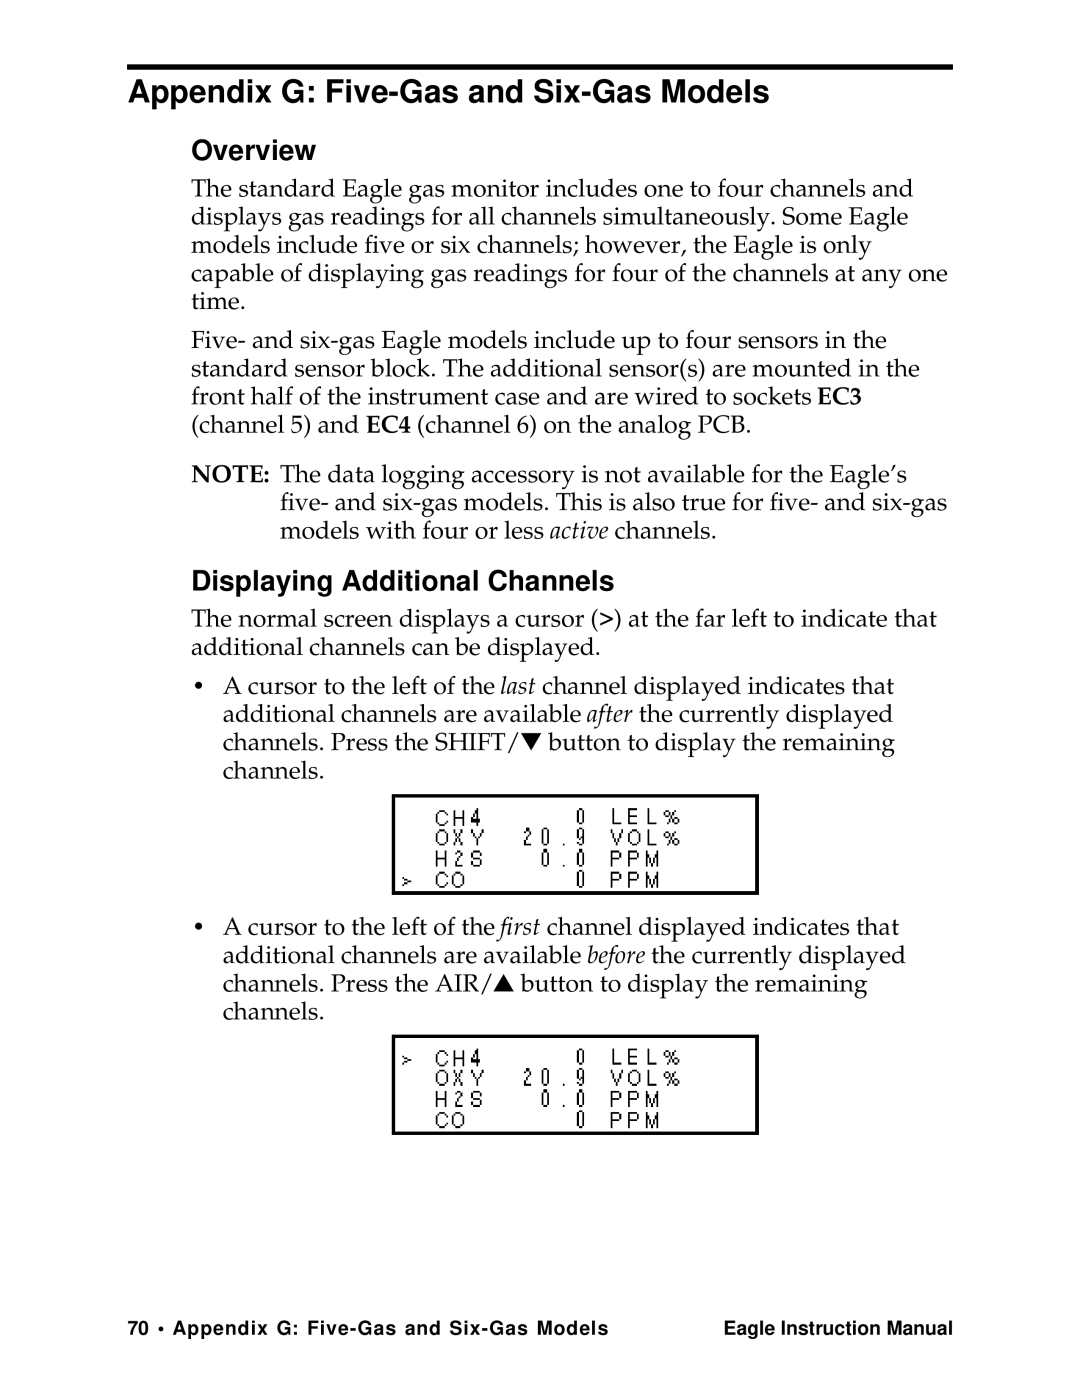 Eagle Home Products Eagle Series instruction manual Appendix G Five-Gas and Six-Gas Models, Displaying Additional Channels 